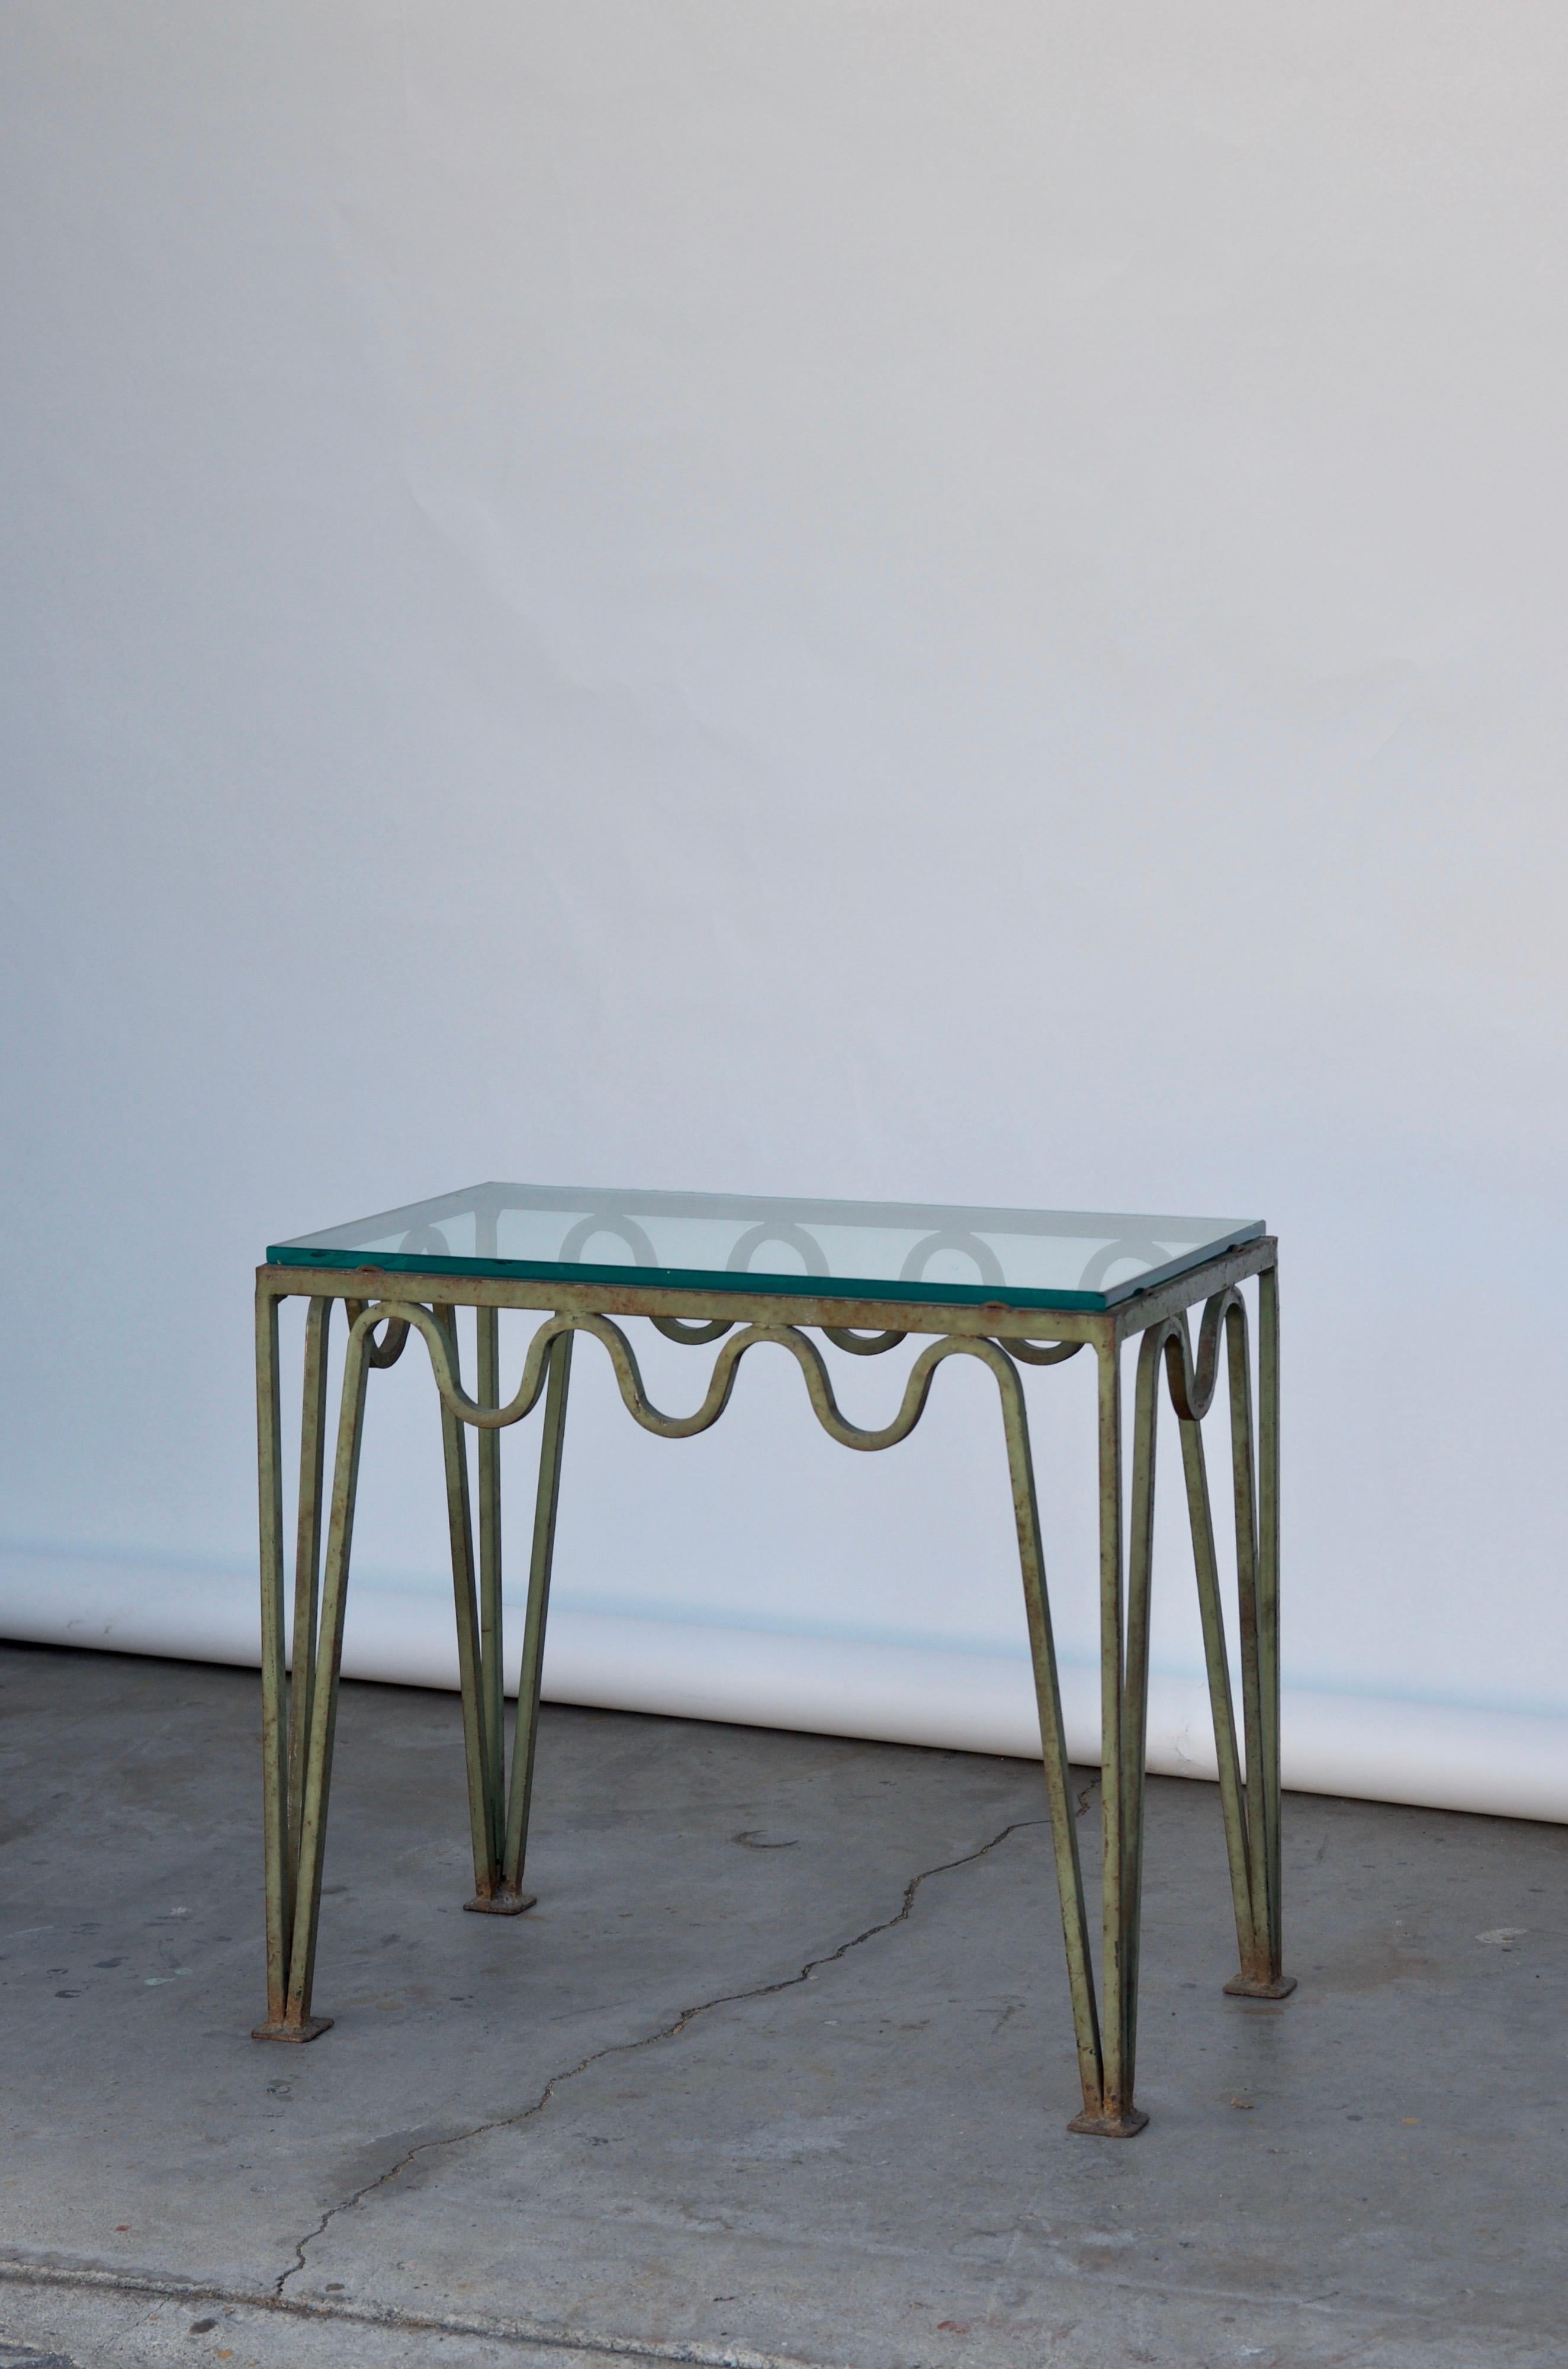 Pair of 'Méandre' verdigris steel and glass side tables by Design Frères.

Hand-applied painted verdigris finish. Chic and understated.